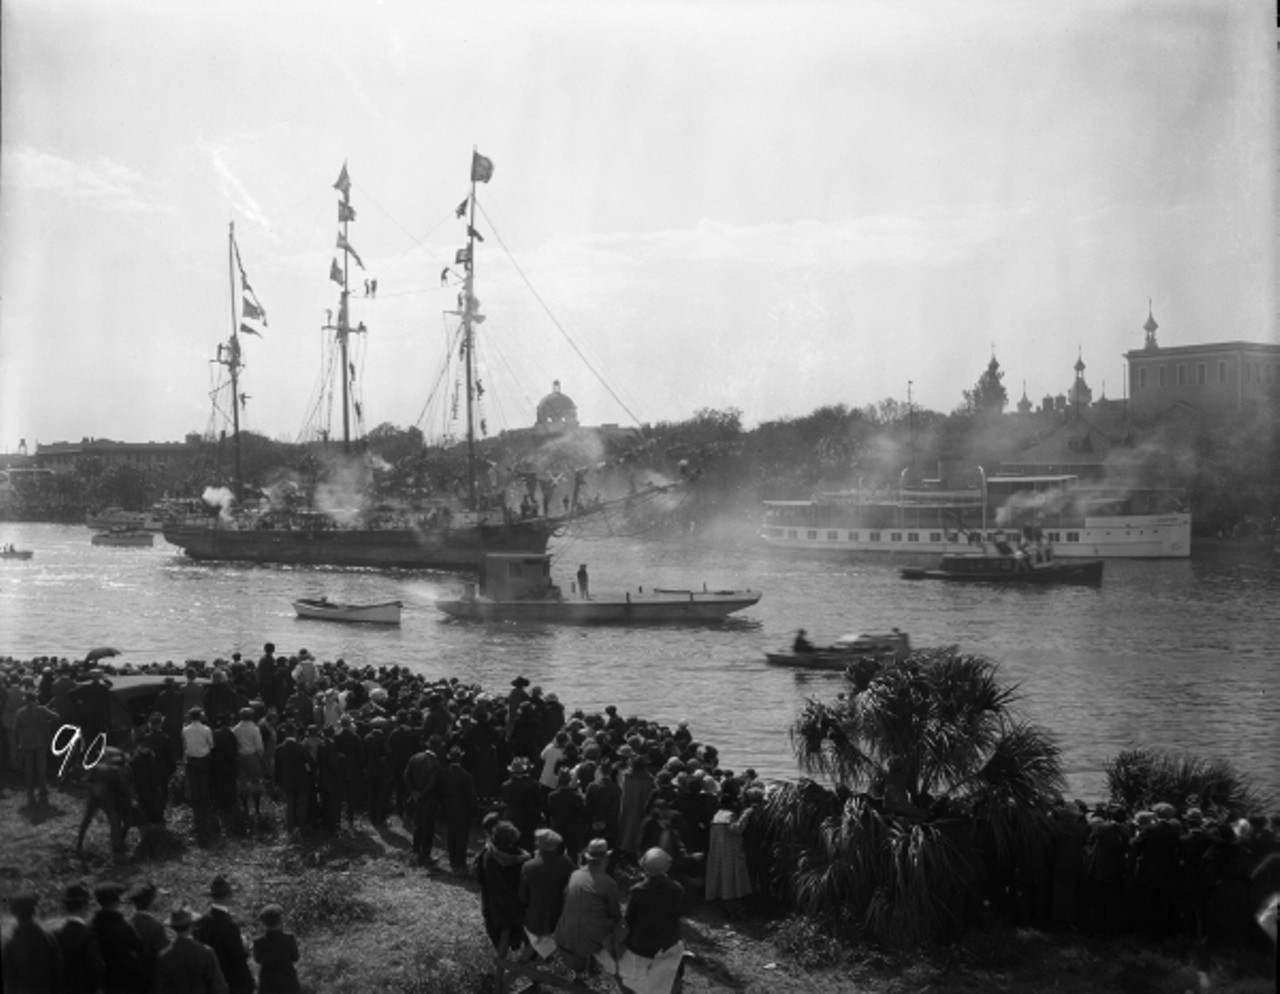 Print CollectionJose Gasparilla pirate ship in regatta during the Gasparilla Carnival in Tampa. Photo taken between 1923 and 1930.